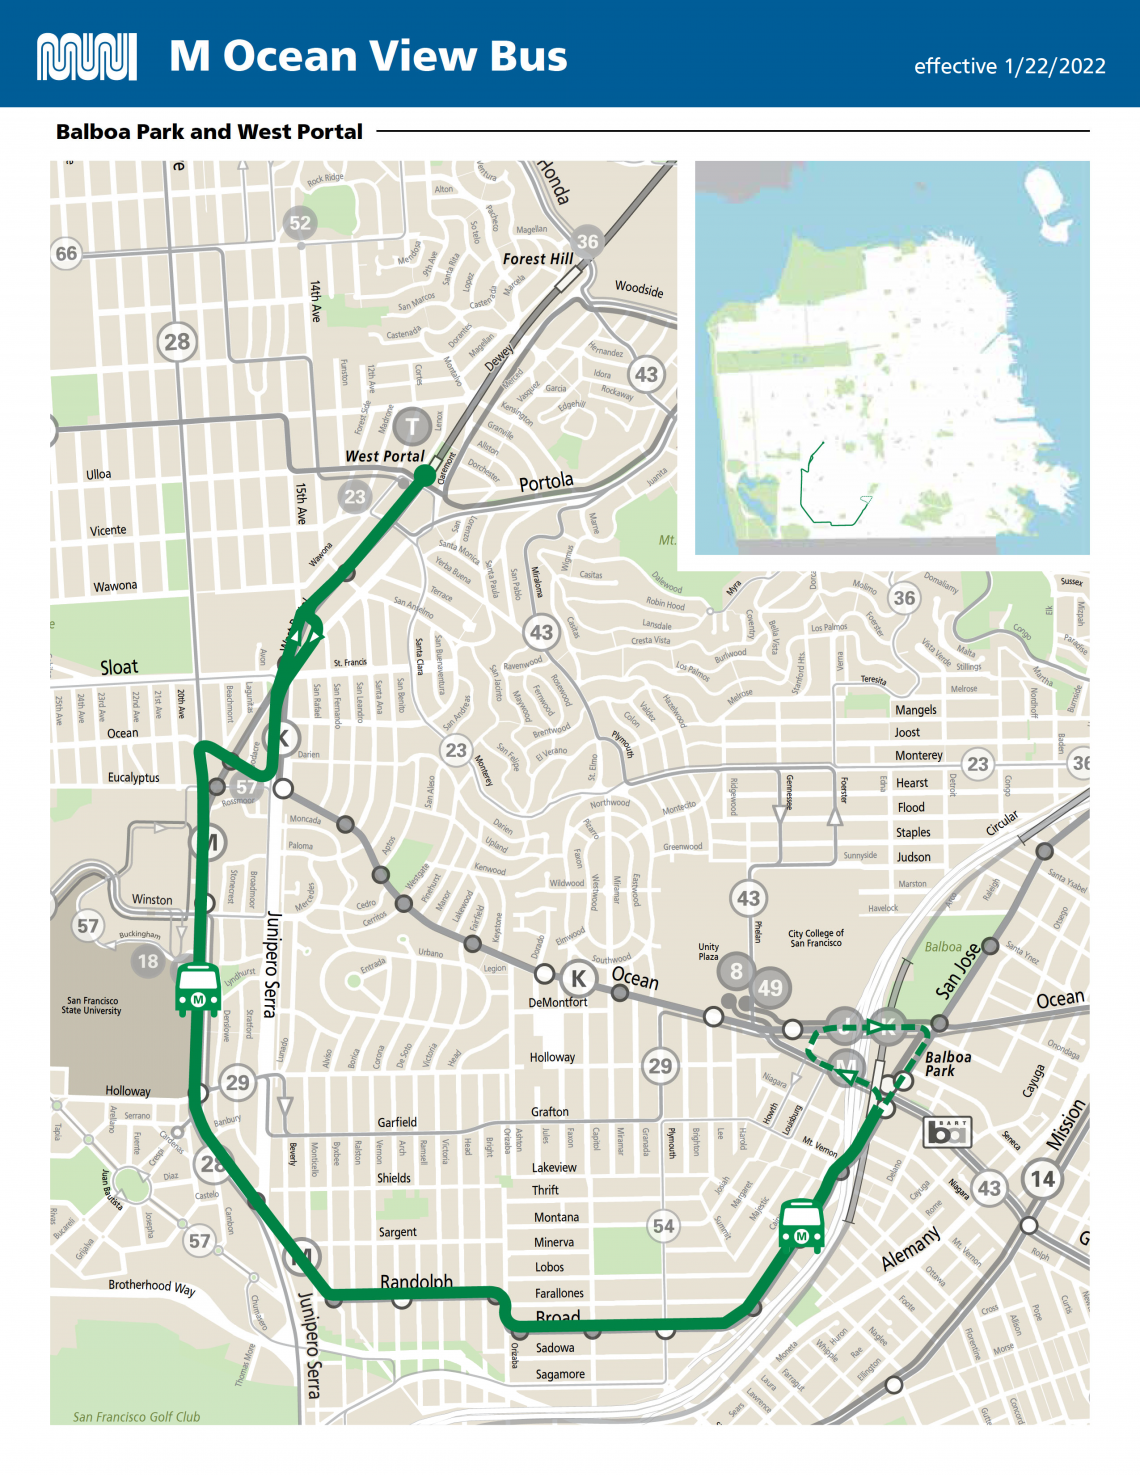 Route Map for M Ocean View Bus